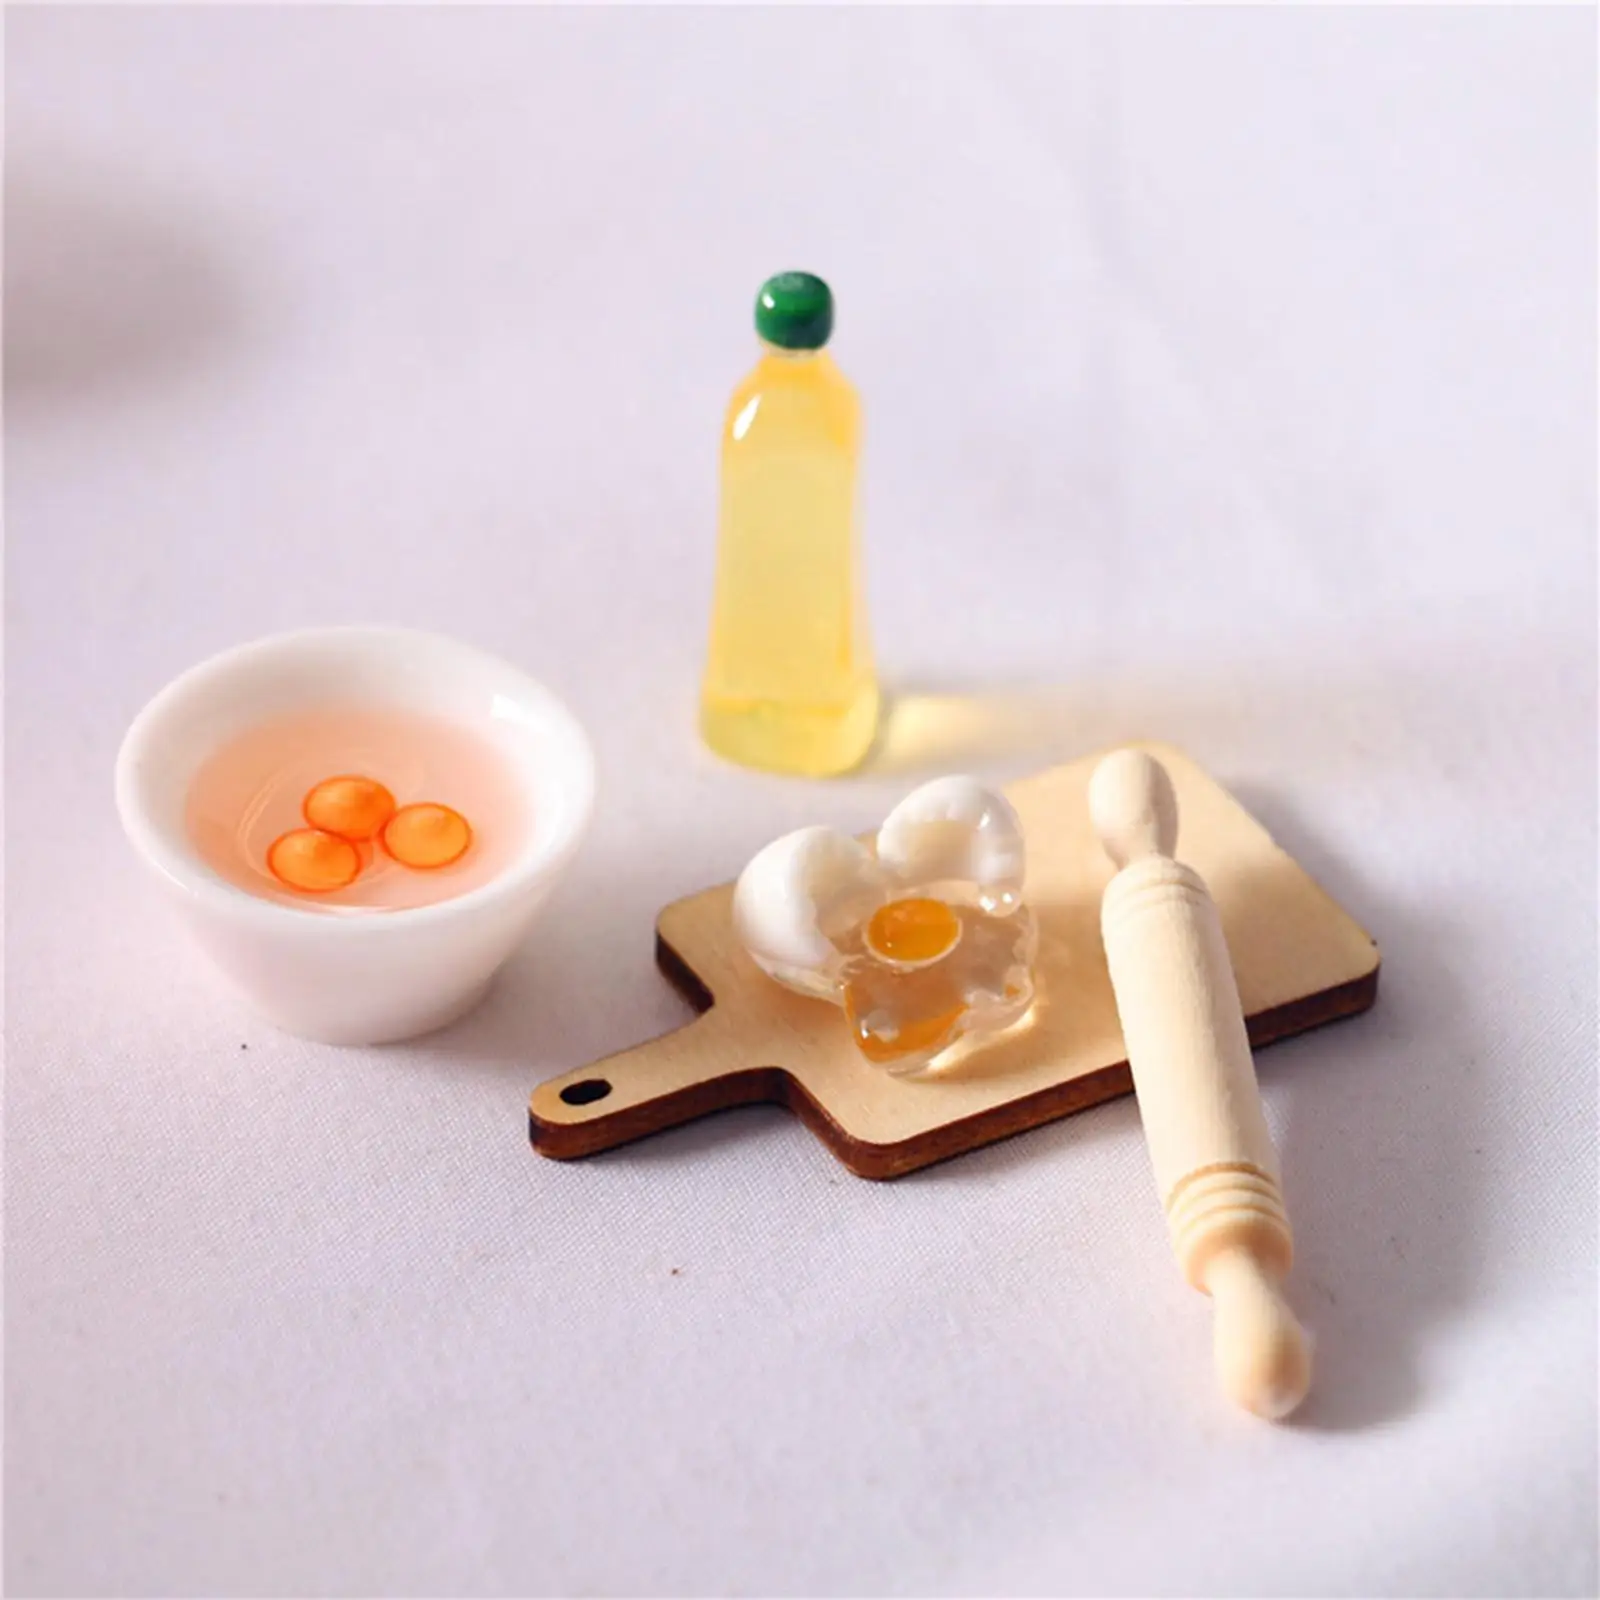 9 Pieces Dollhouse Baking Set Rolling Pin Photo Props Pretend Cooking Toys Birthday Gift